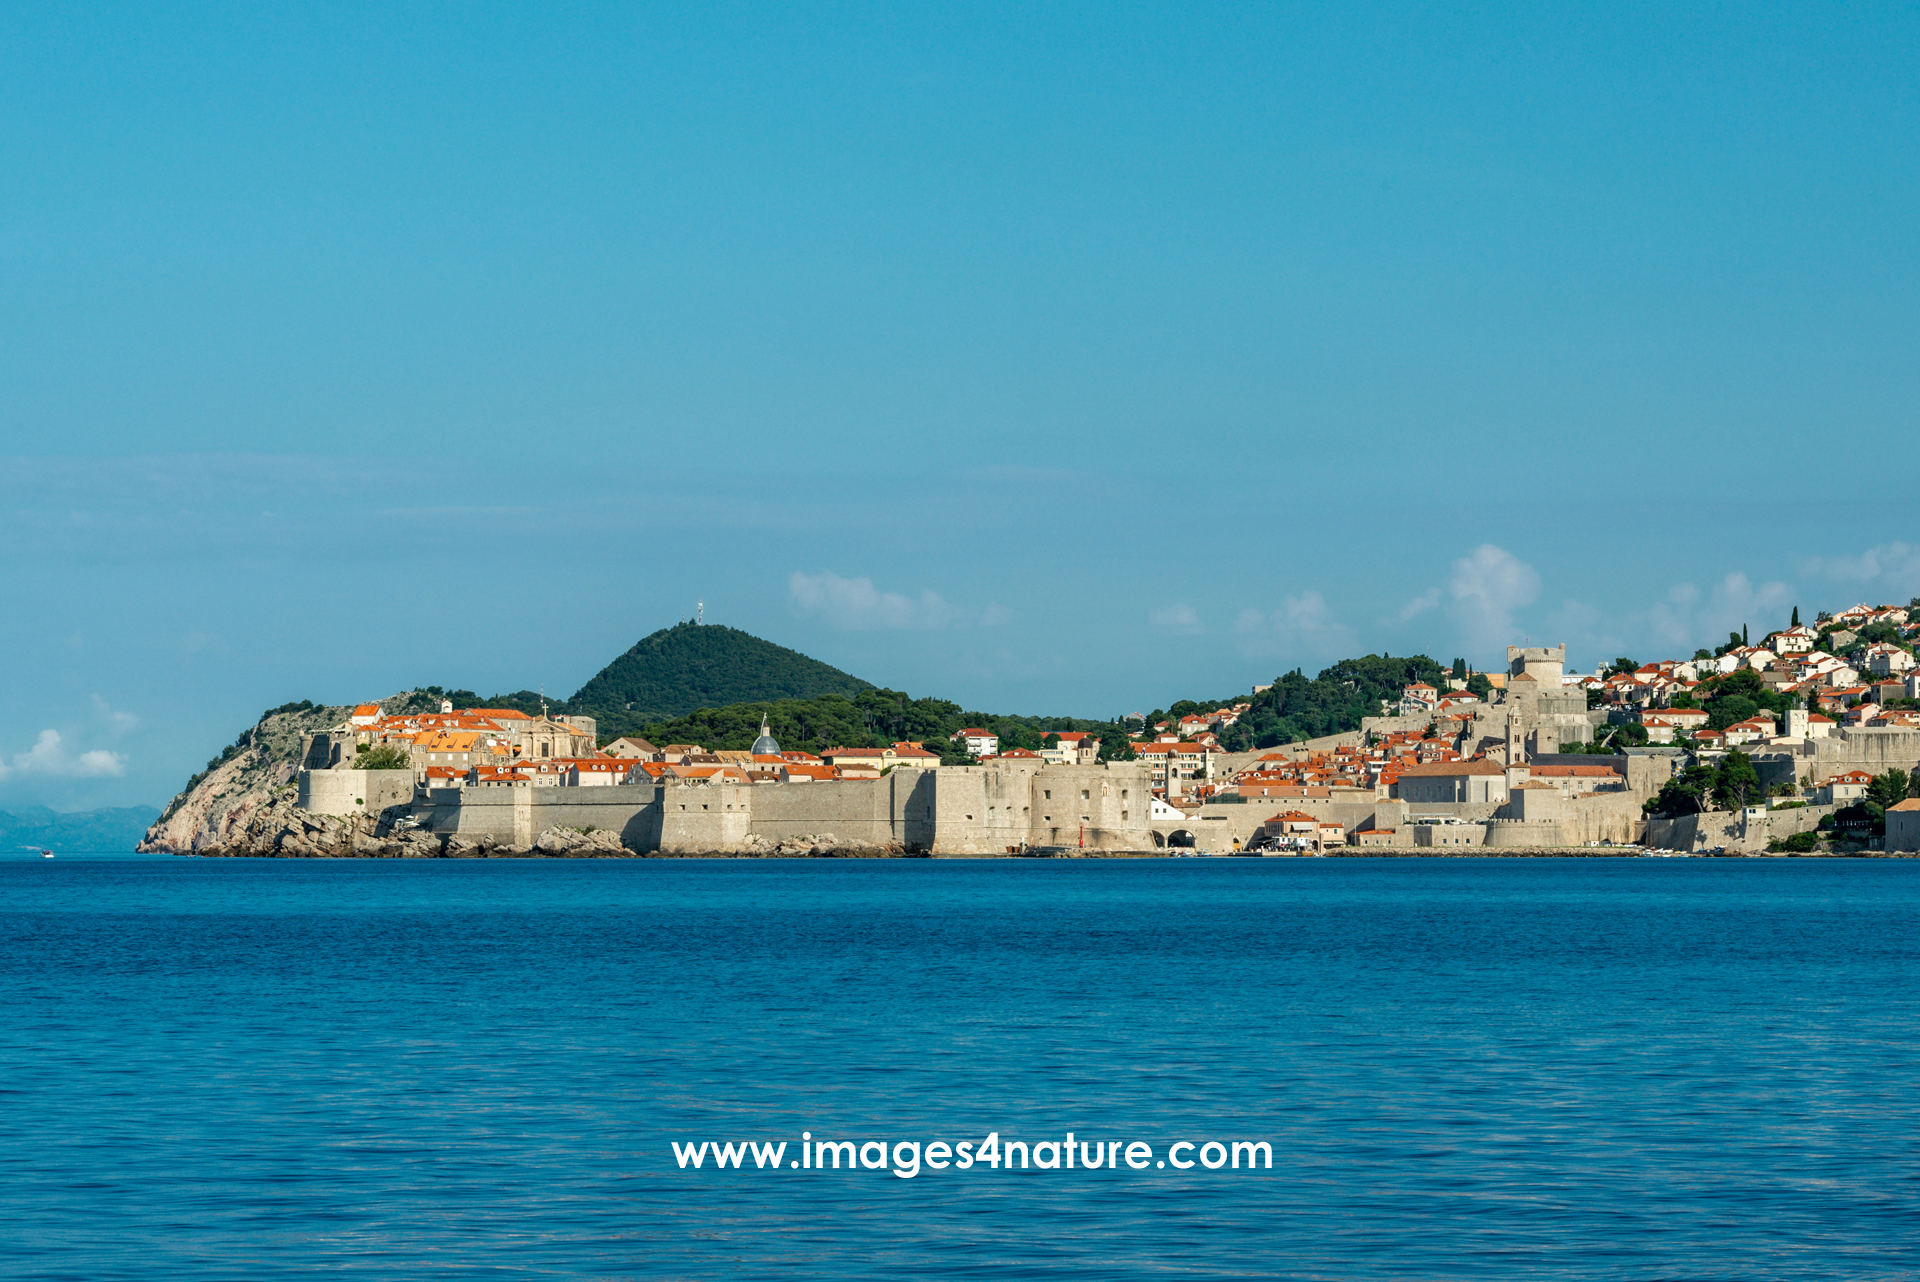 Old town Dubrovnik silhouette with city walls in the morning sun